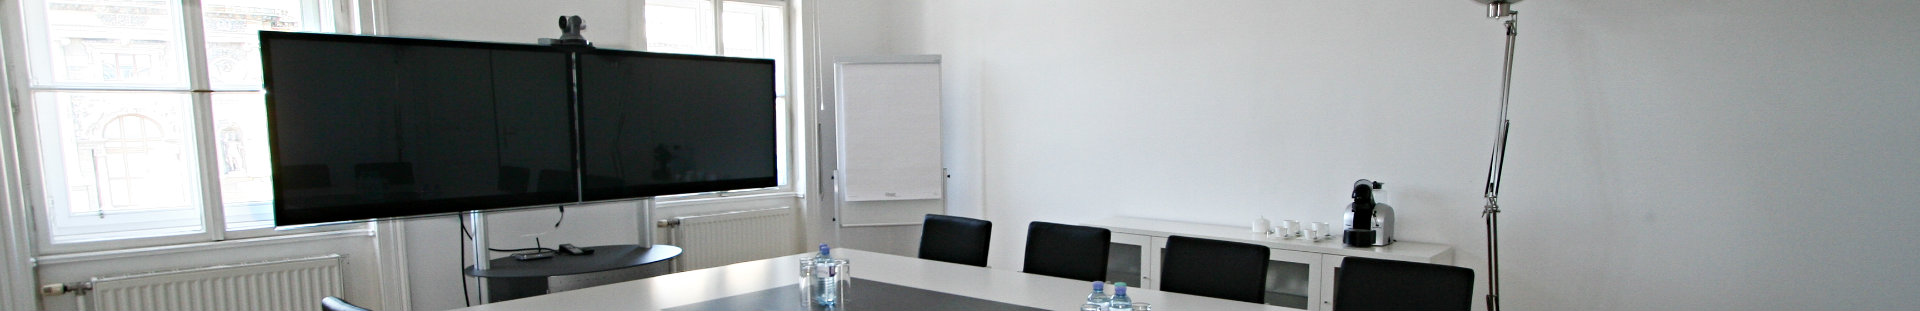 Sale of video conference systems and video conferencing equipment in Austria